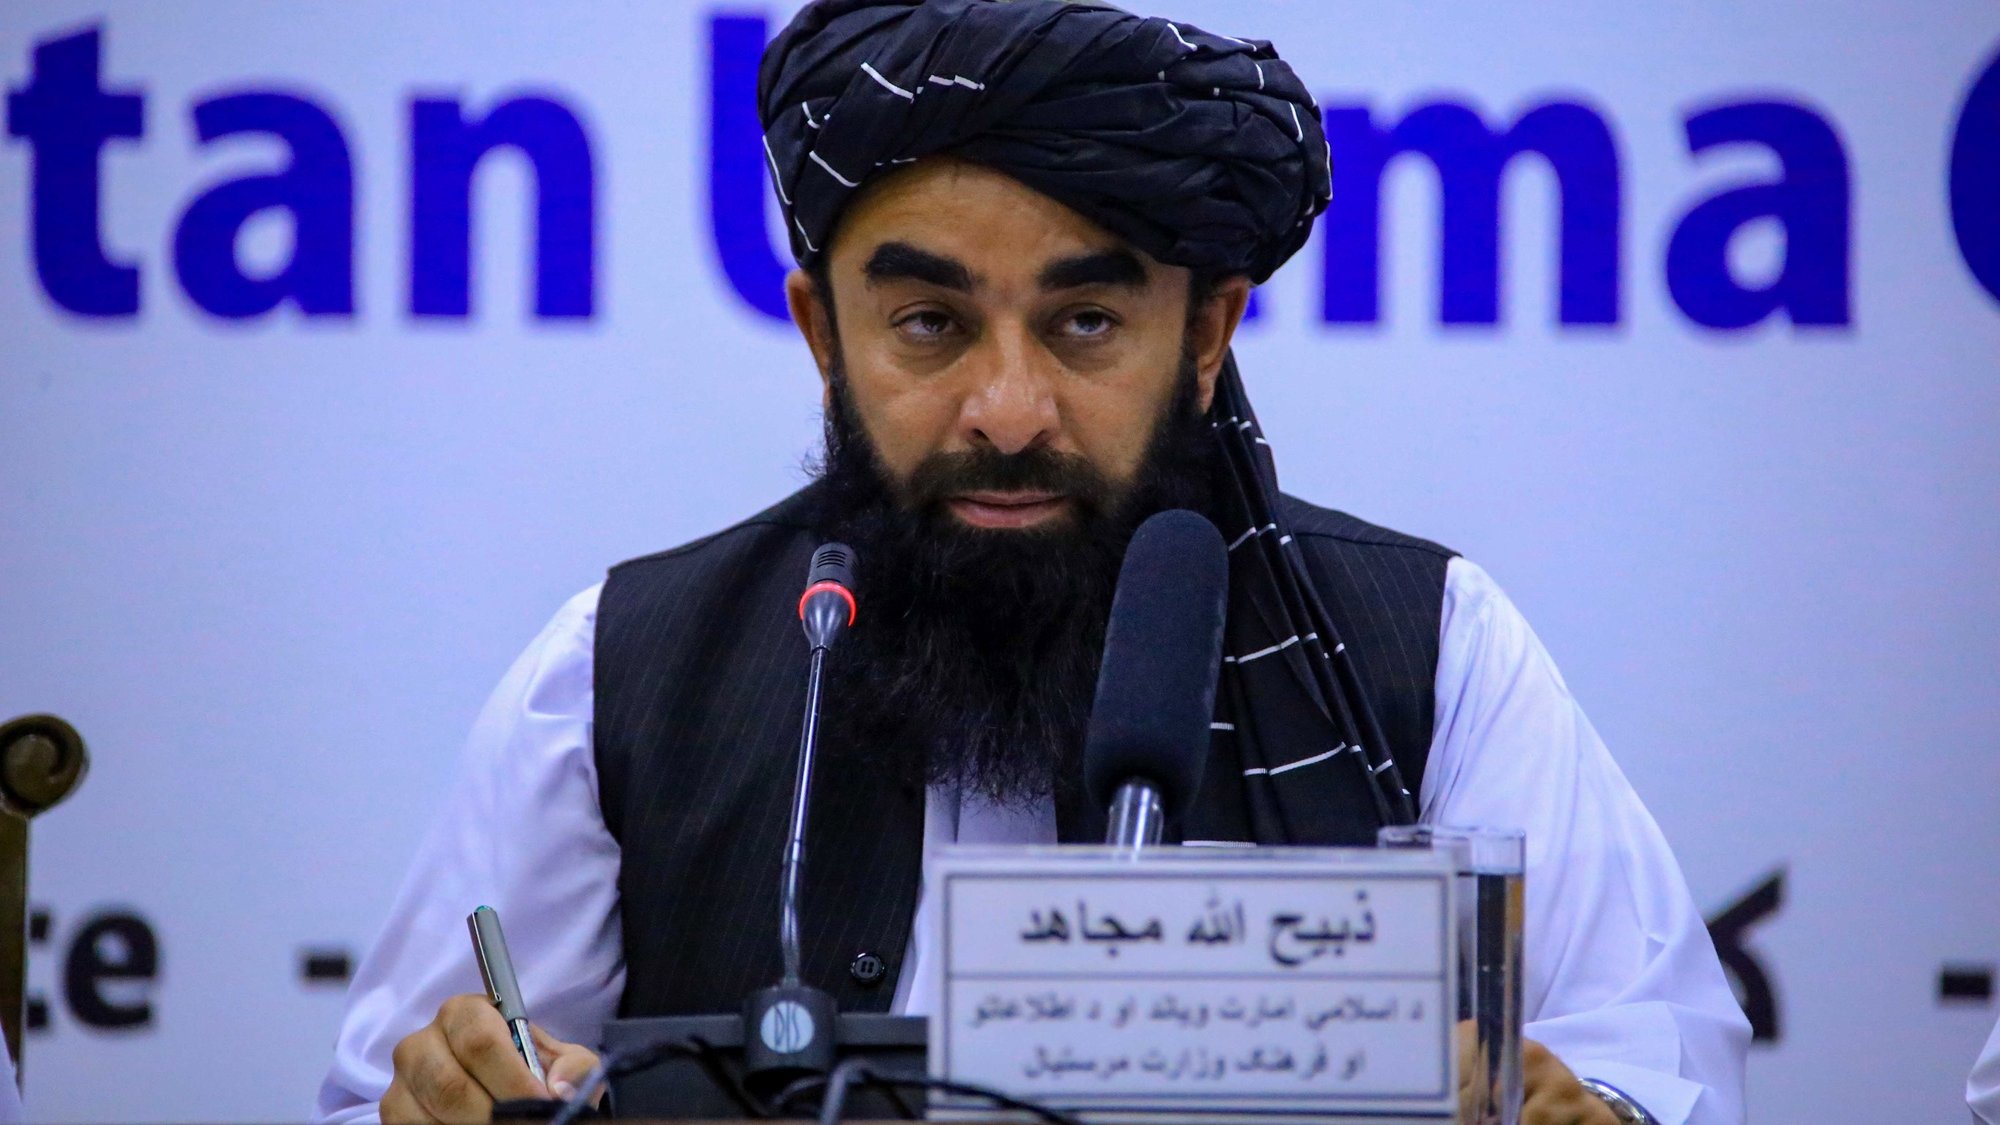 epa10044361 Zabiullah Mujahid, Taliban spokesman talks with journalists as they brief them about Loya Jirga (Grand Assembly), in Kabul, Afghanistan, 30 June 2022. A brief gunfire triggered chaos at a grand assembly of religious scholars from across Afghanistan on 30 June, the first such gathering hosted by the de facto Taliban government since it took over in August 2021. Many Afghans have demanded a more inclusive government with representation of different political, ethnic, and social groups, apart from urging the Taliban to respect the social progress and symbolism developed over the last two decades following the United States&#039; invasion.  EPA/STRINGER